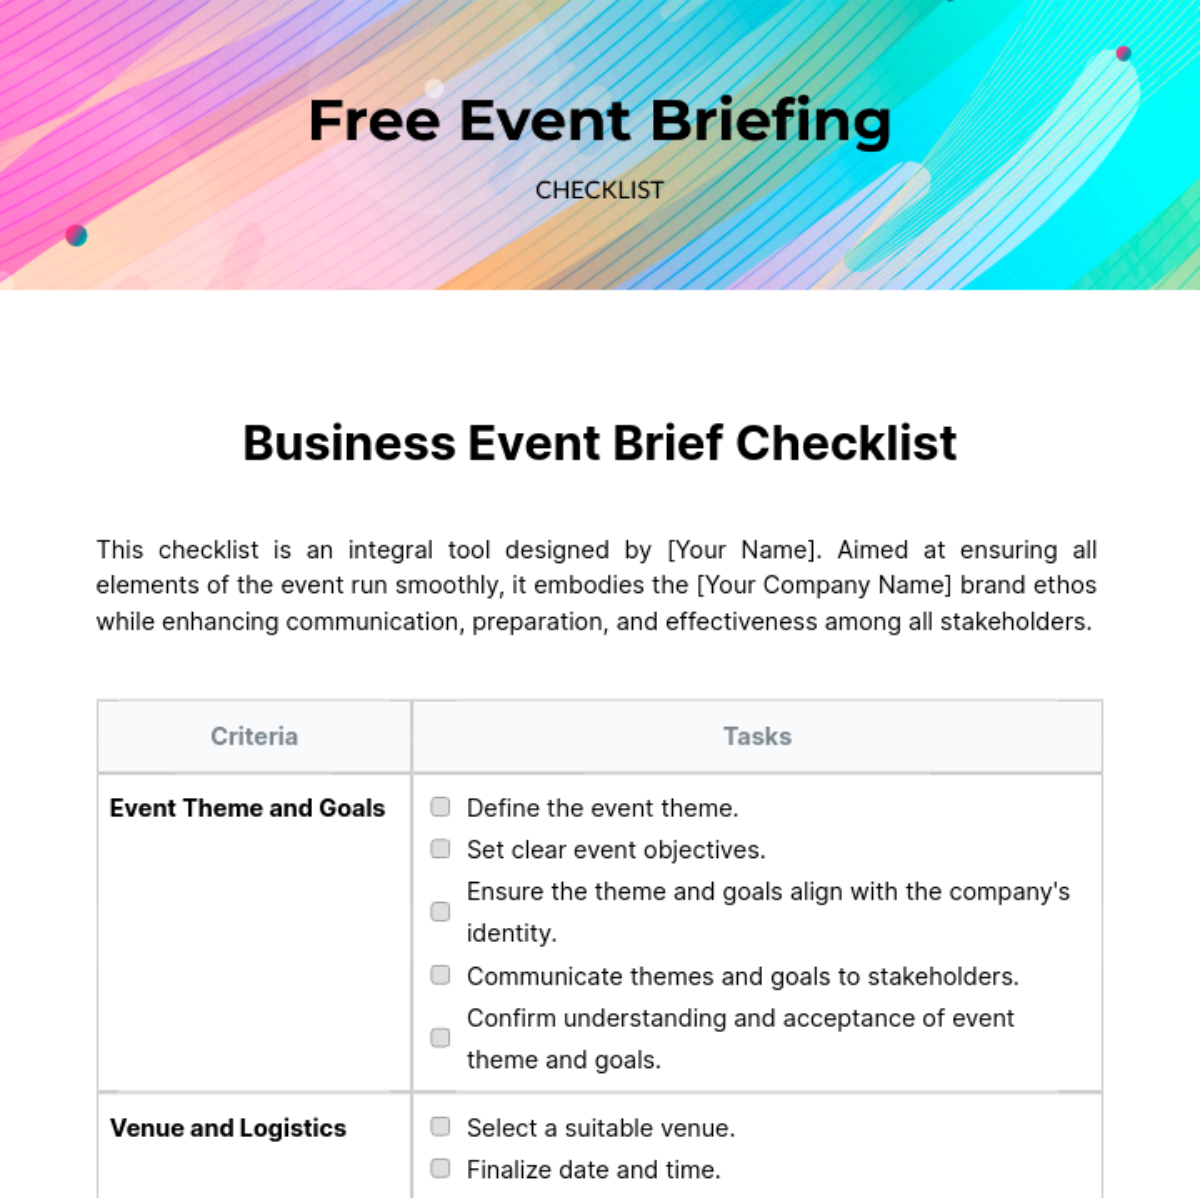 Free Event Briefing Checklist Template